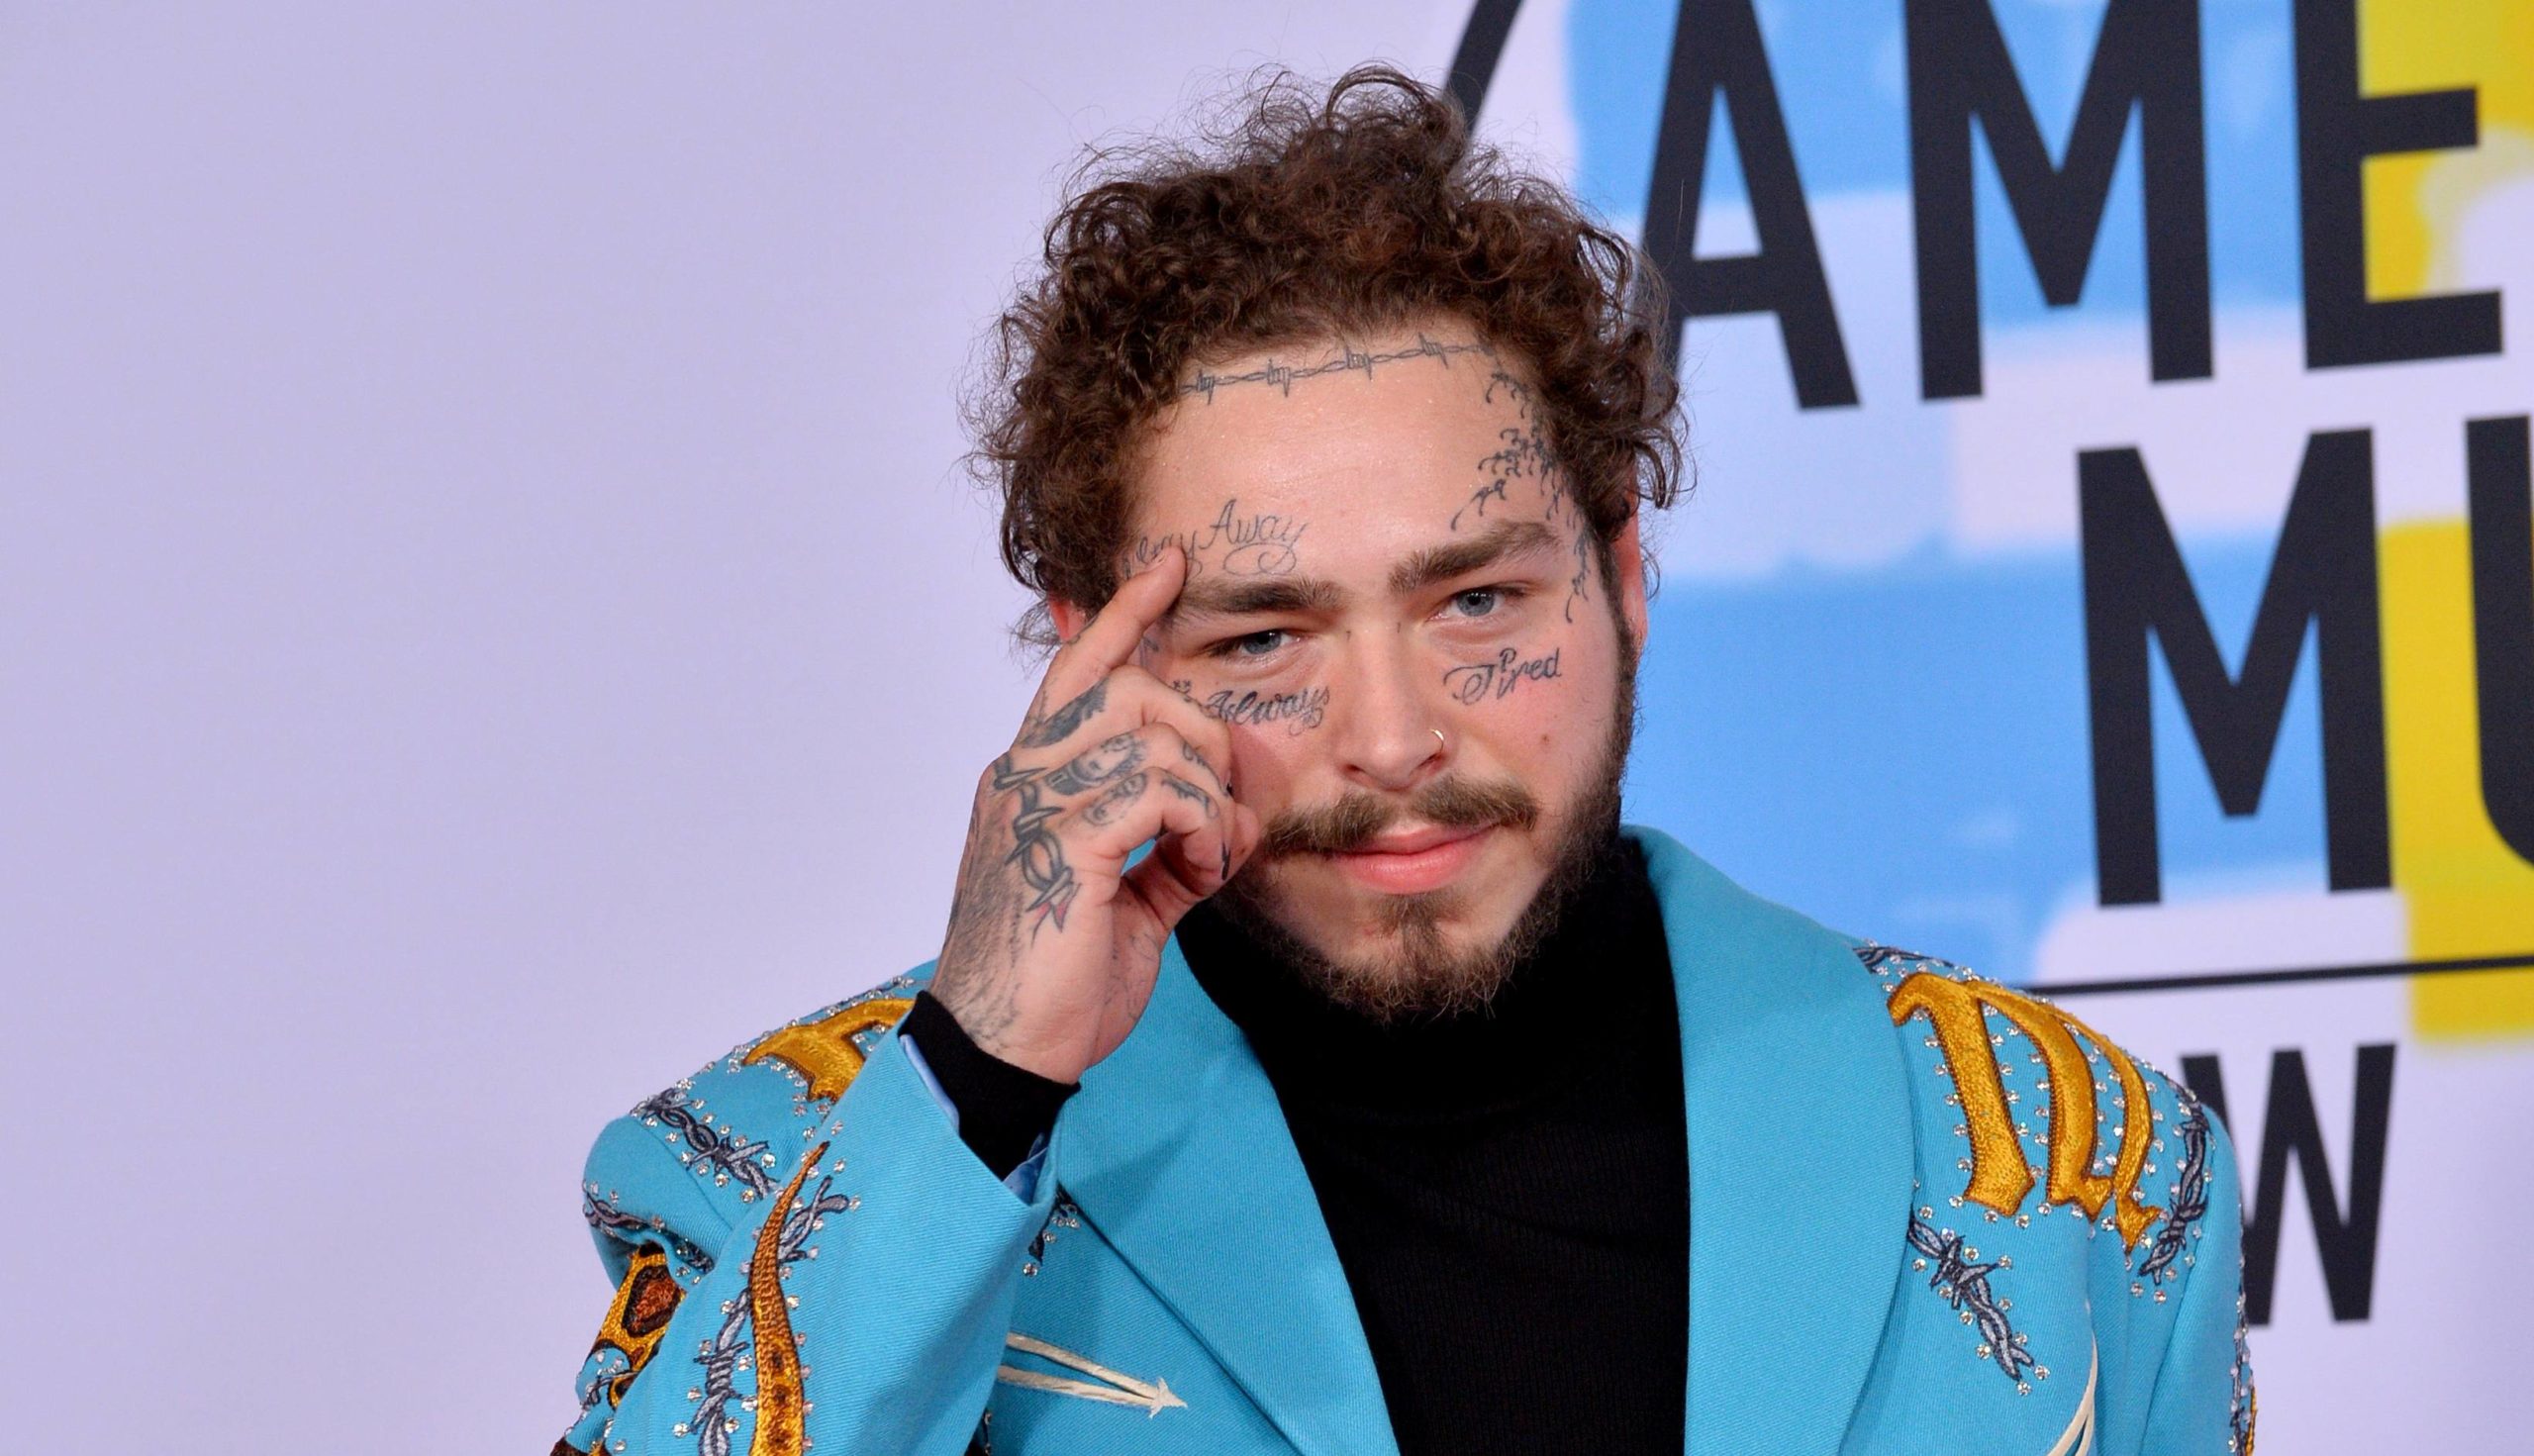 Funny Magic Cards Post malone caused a real scene dropping major cash on magic: the